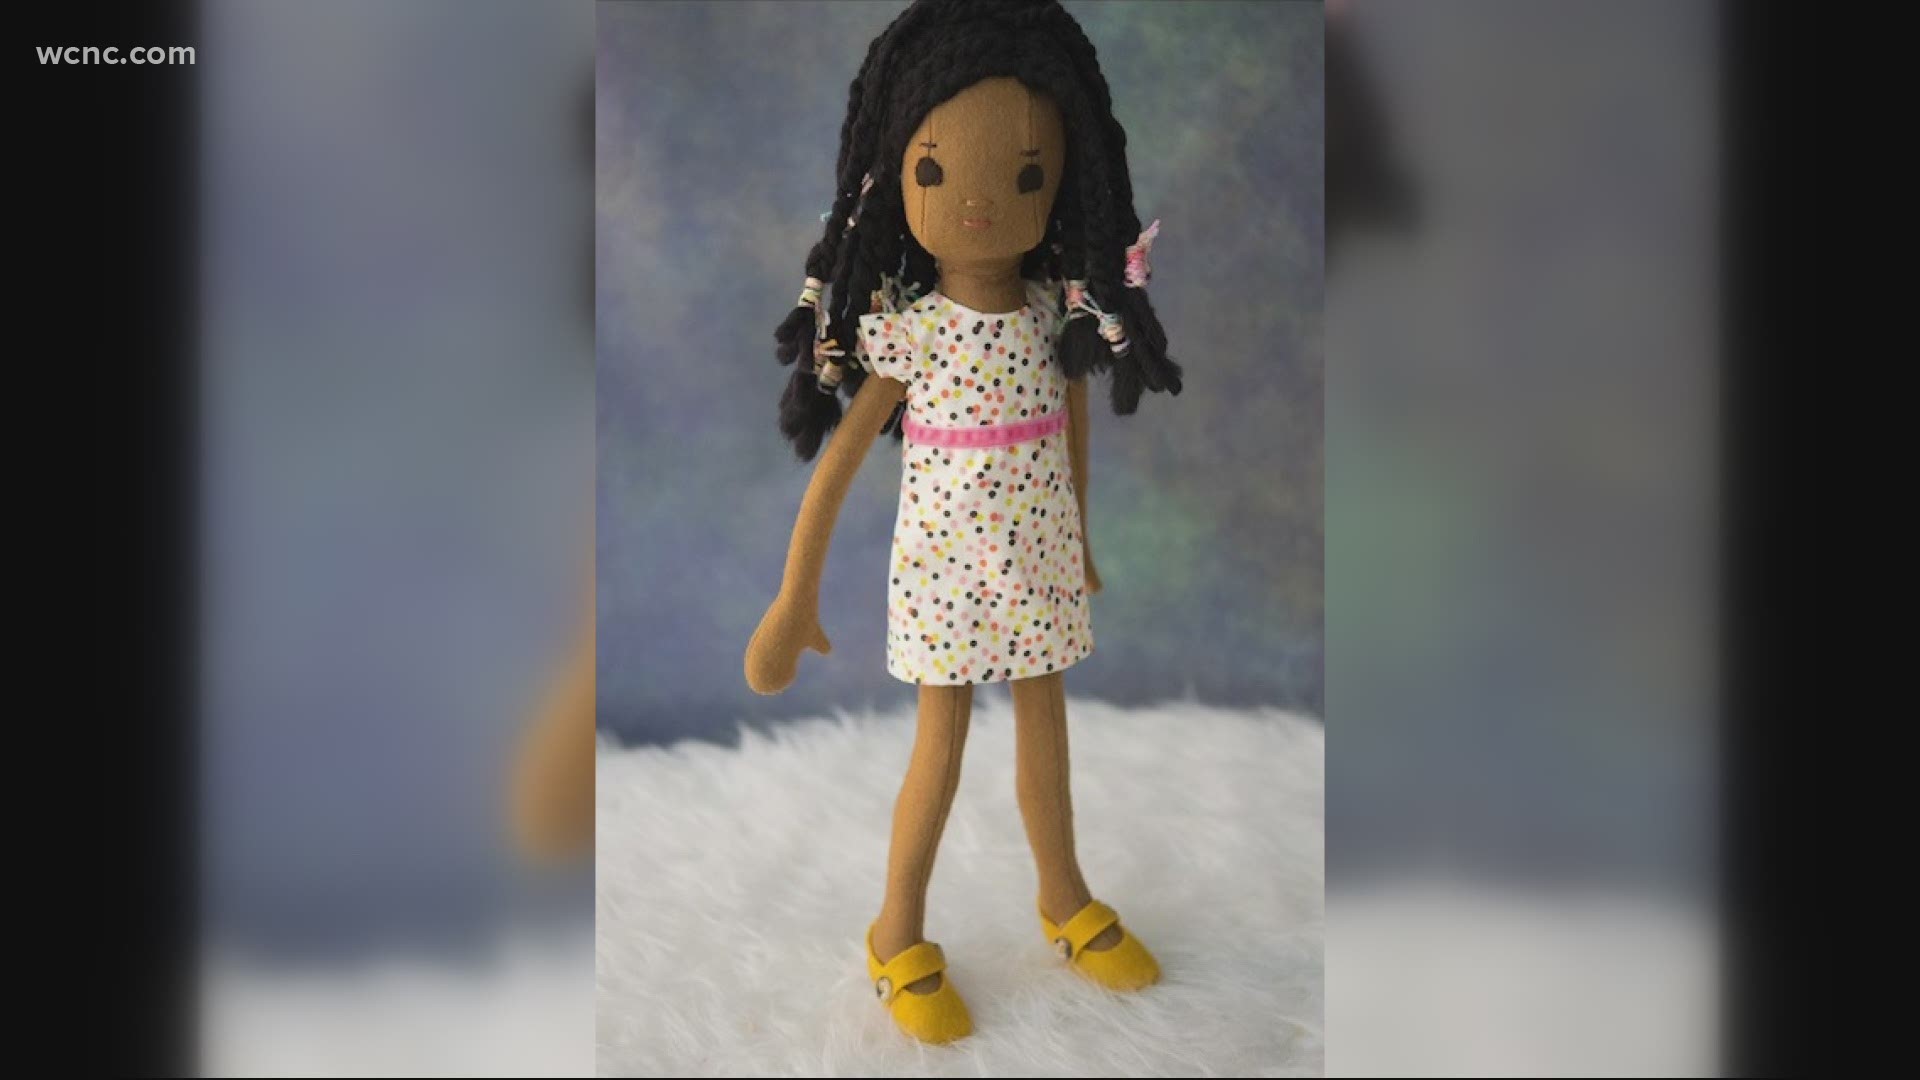 Ruby Durham learns how these dolls are positively impacting girls around the world.